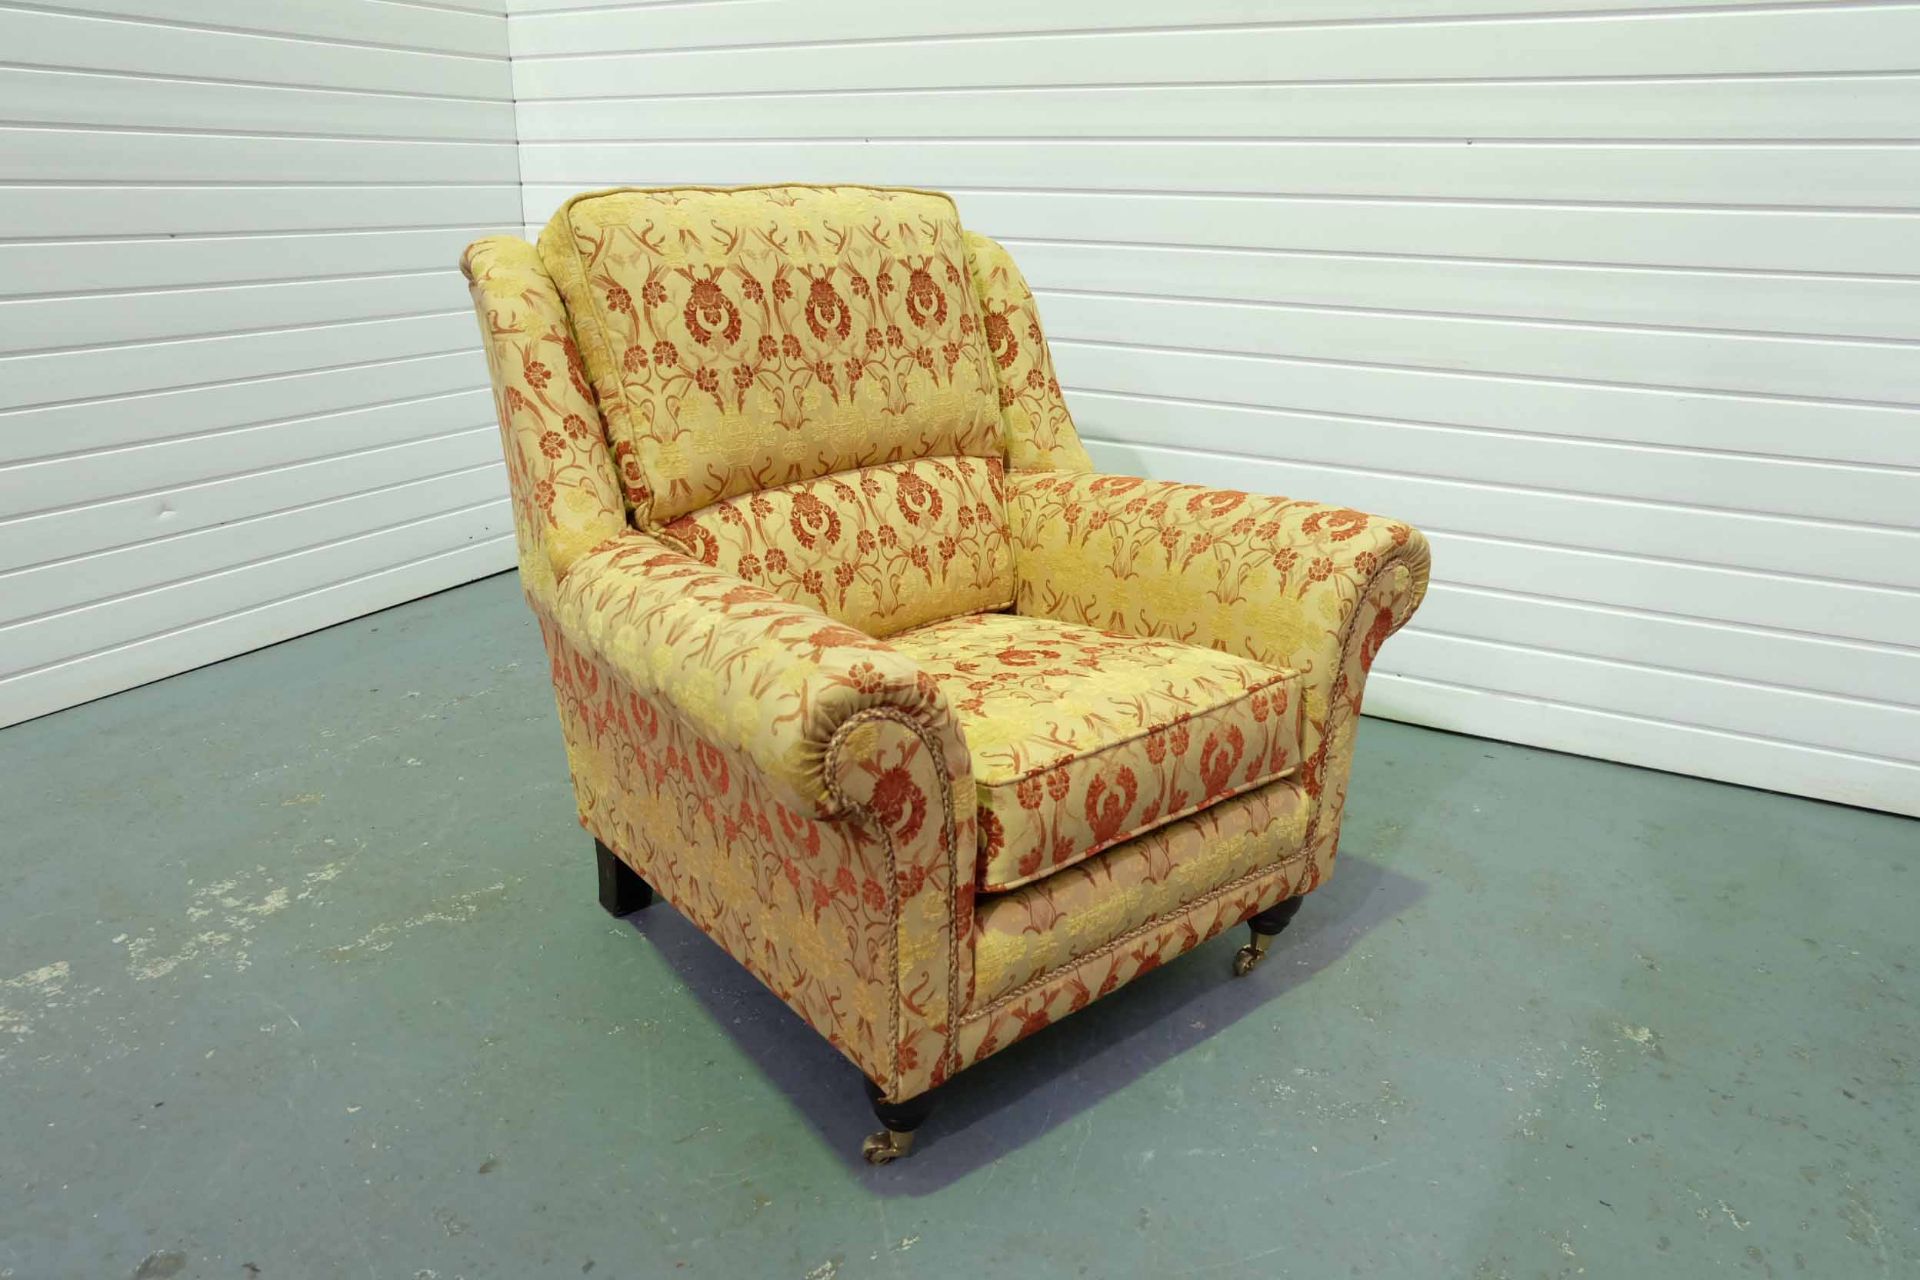 Steed Upholstery 'Lincoln' Range Fully Handmade Chair. Castor Wheels to the Front of the Chair. In J - Image 3 of 3